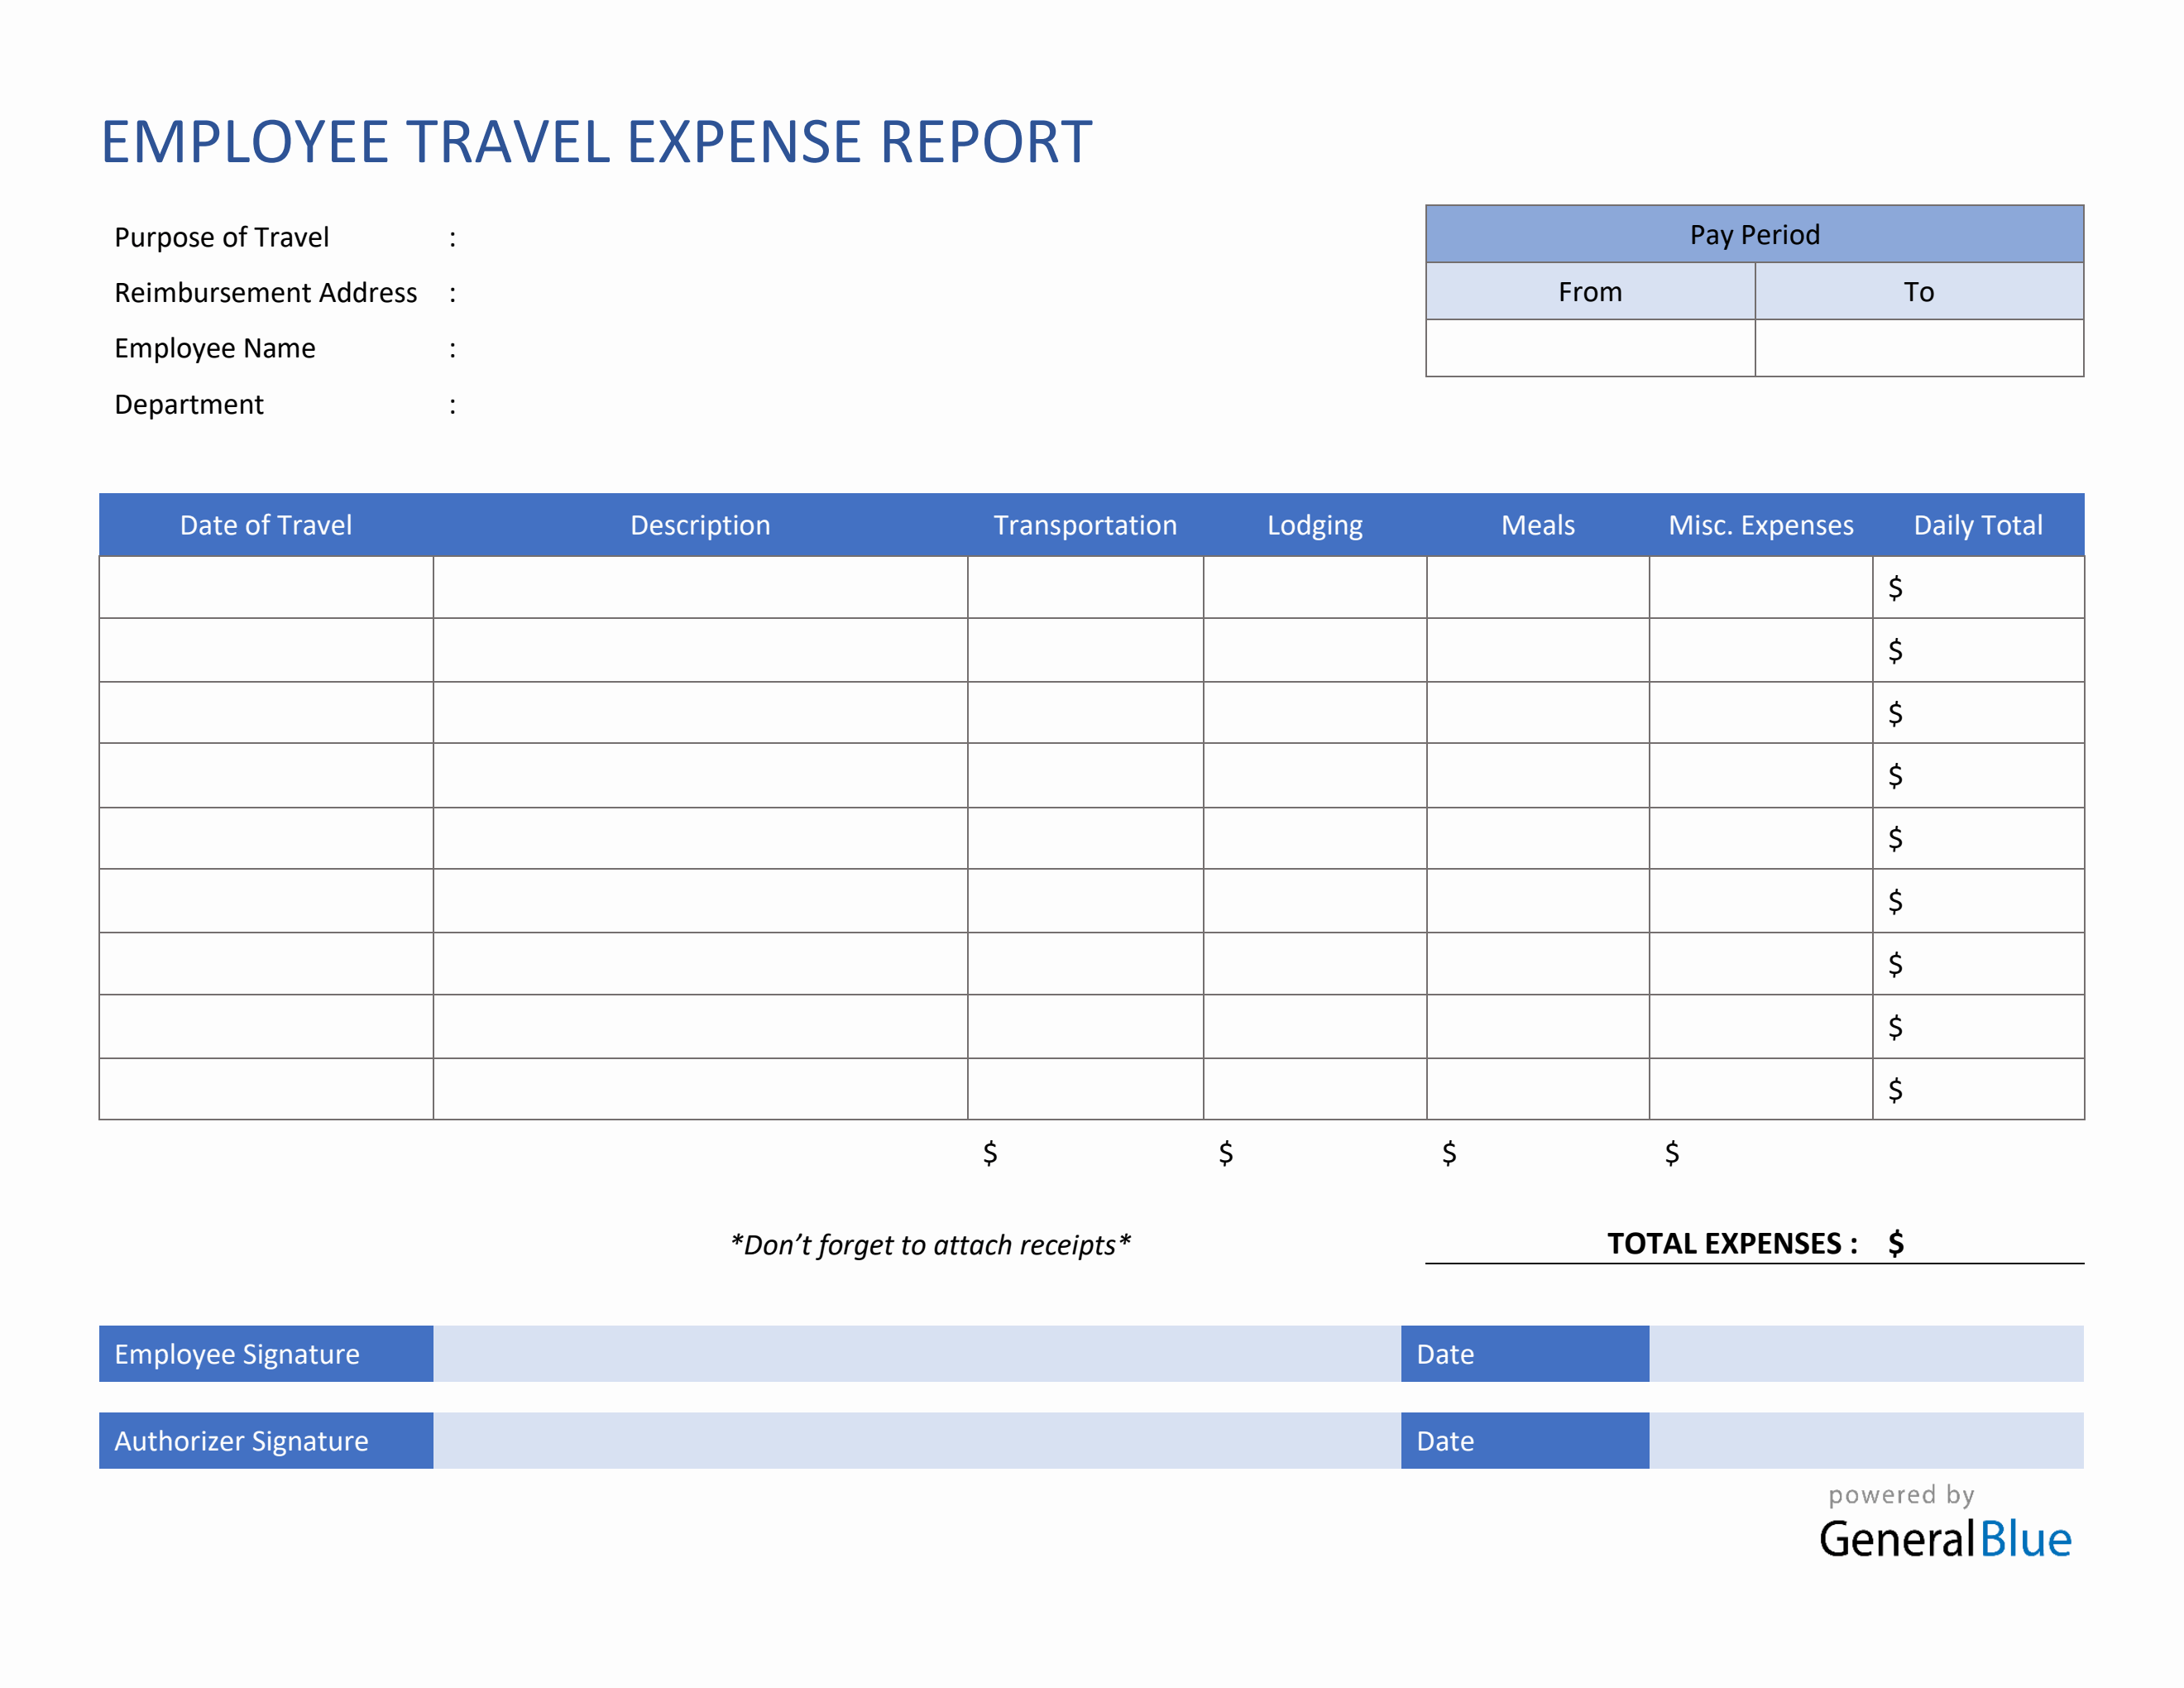 expense report travel expenses